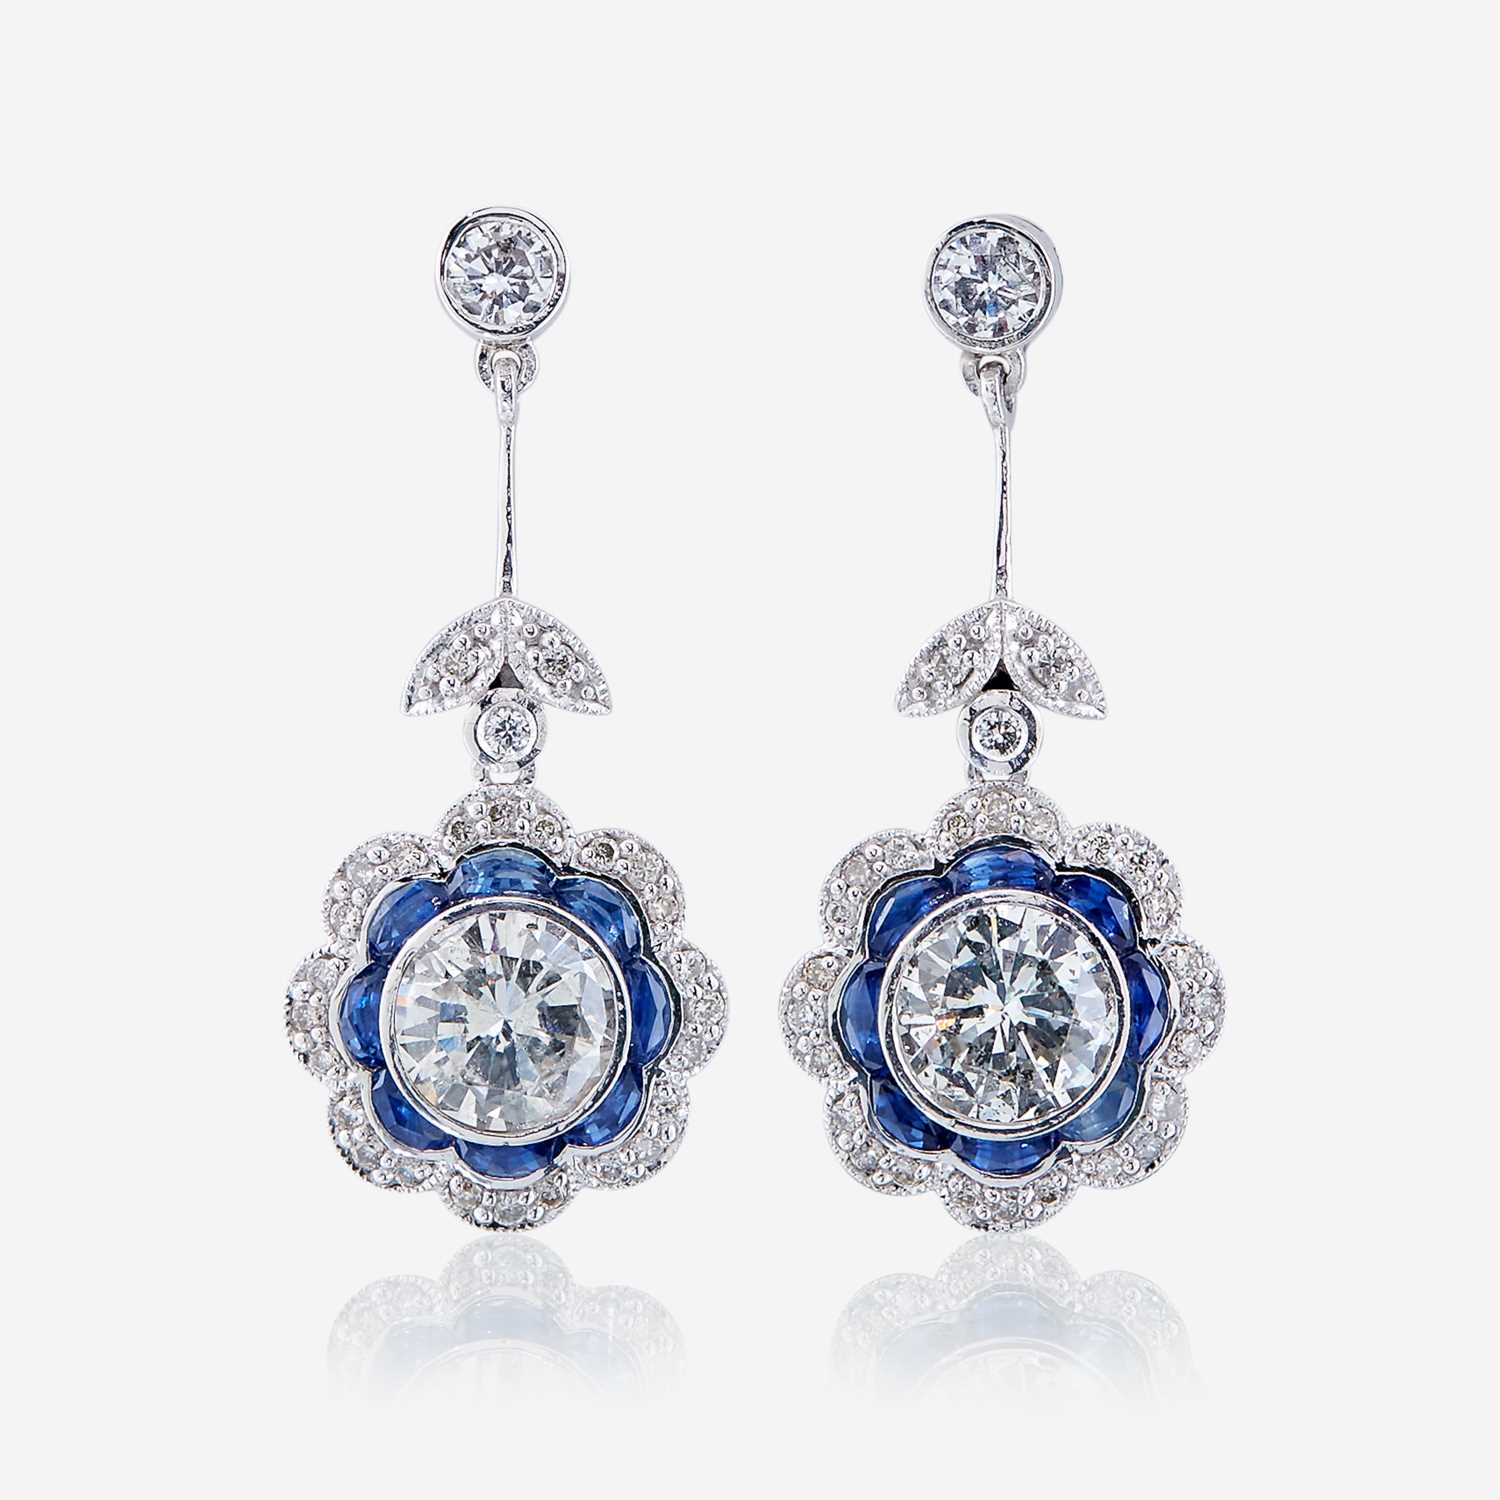 Lot 46 - A pair of diamond, sapphire, and platinum earrings